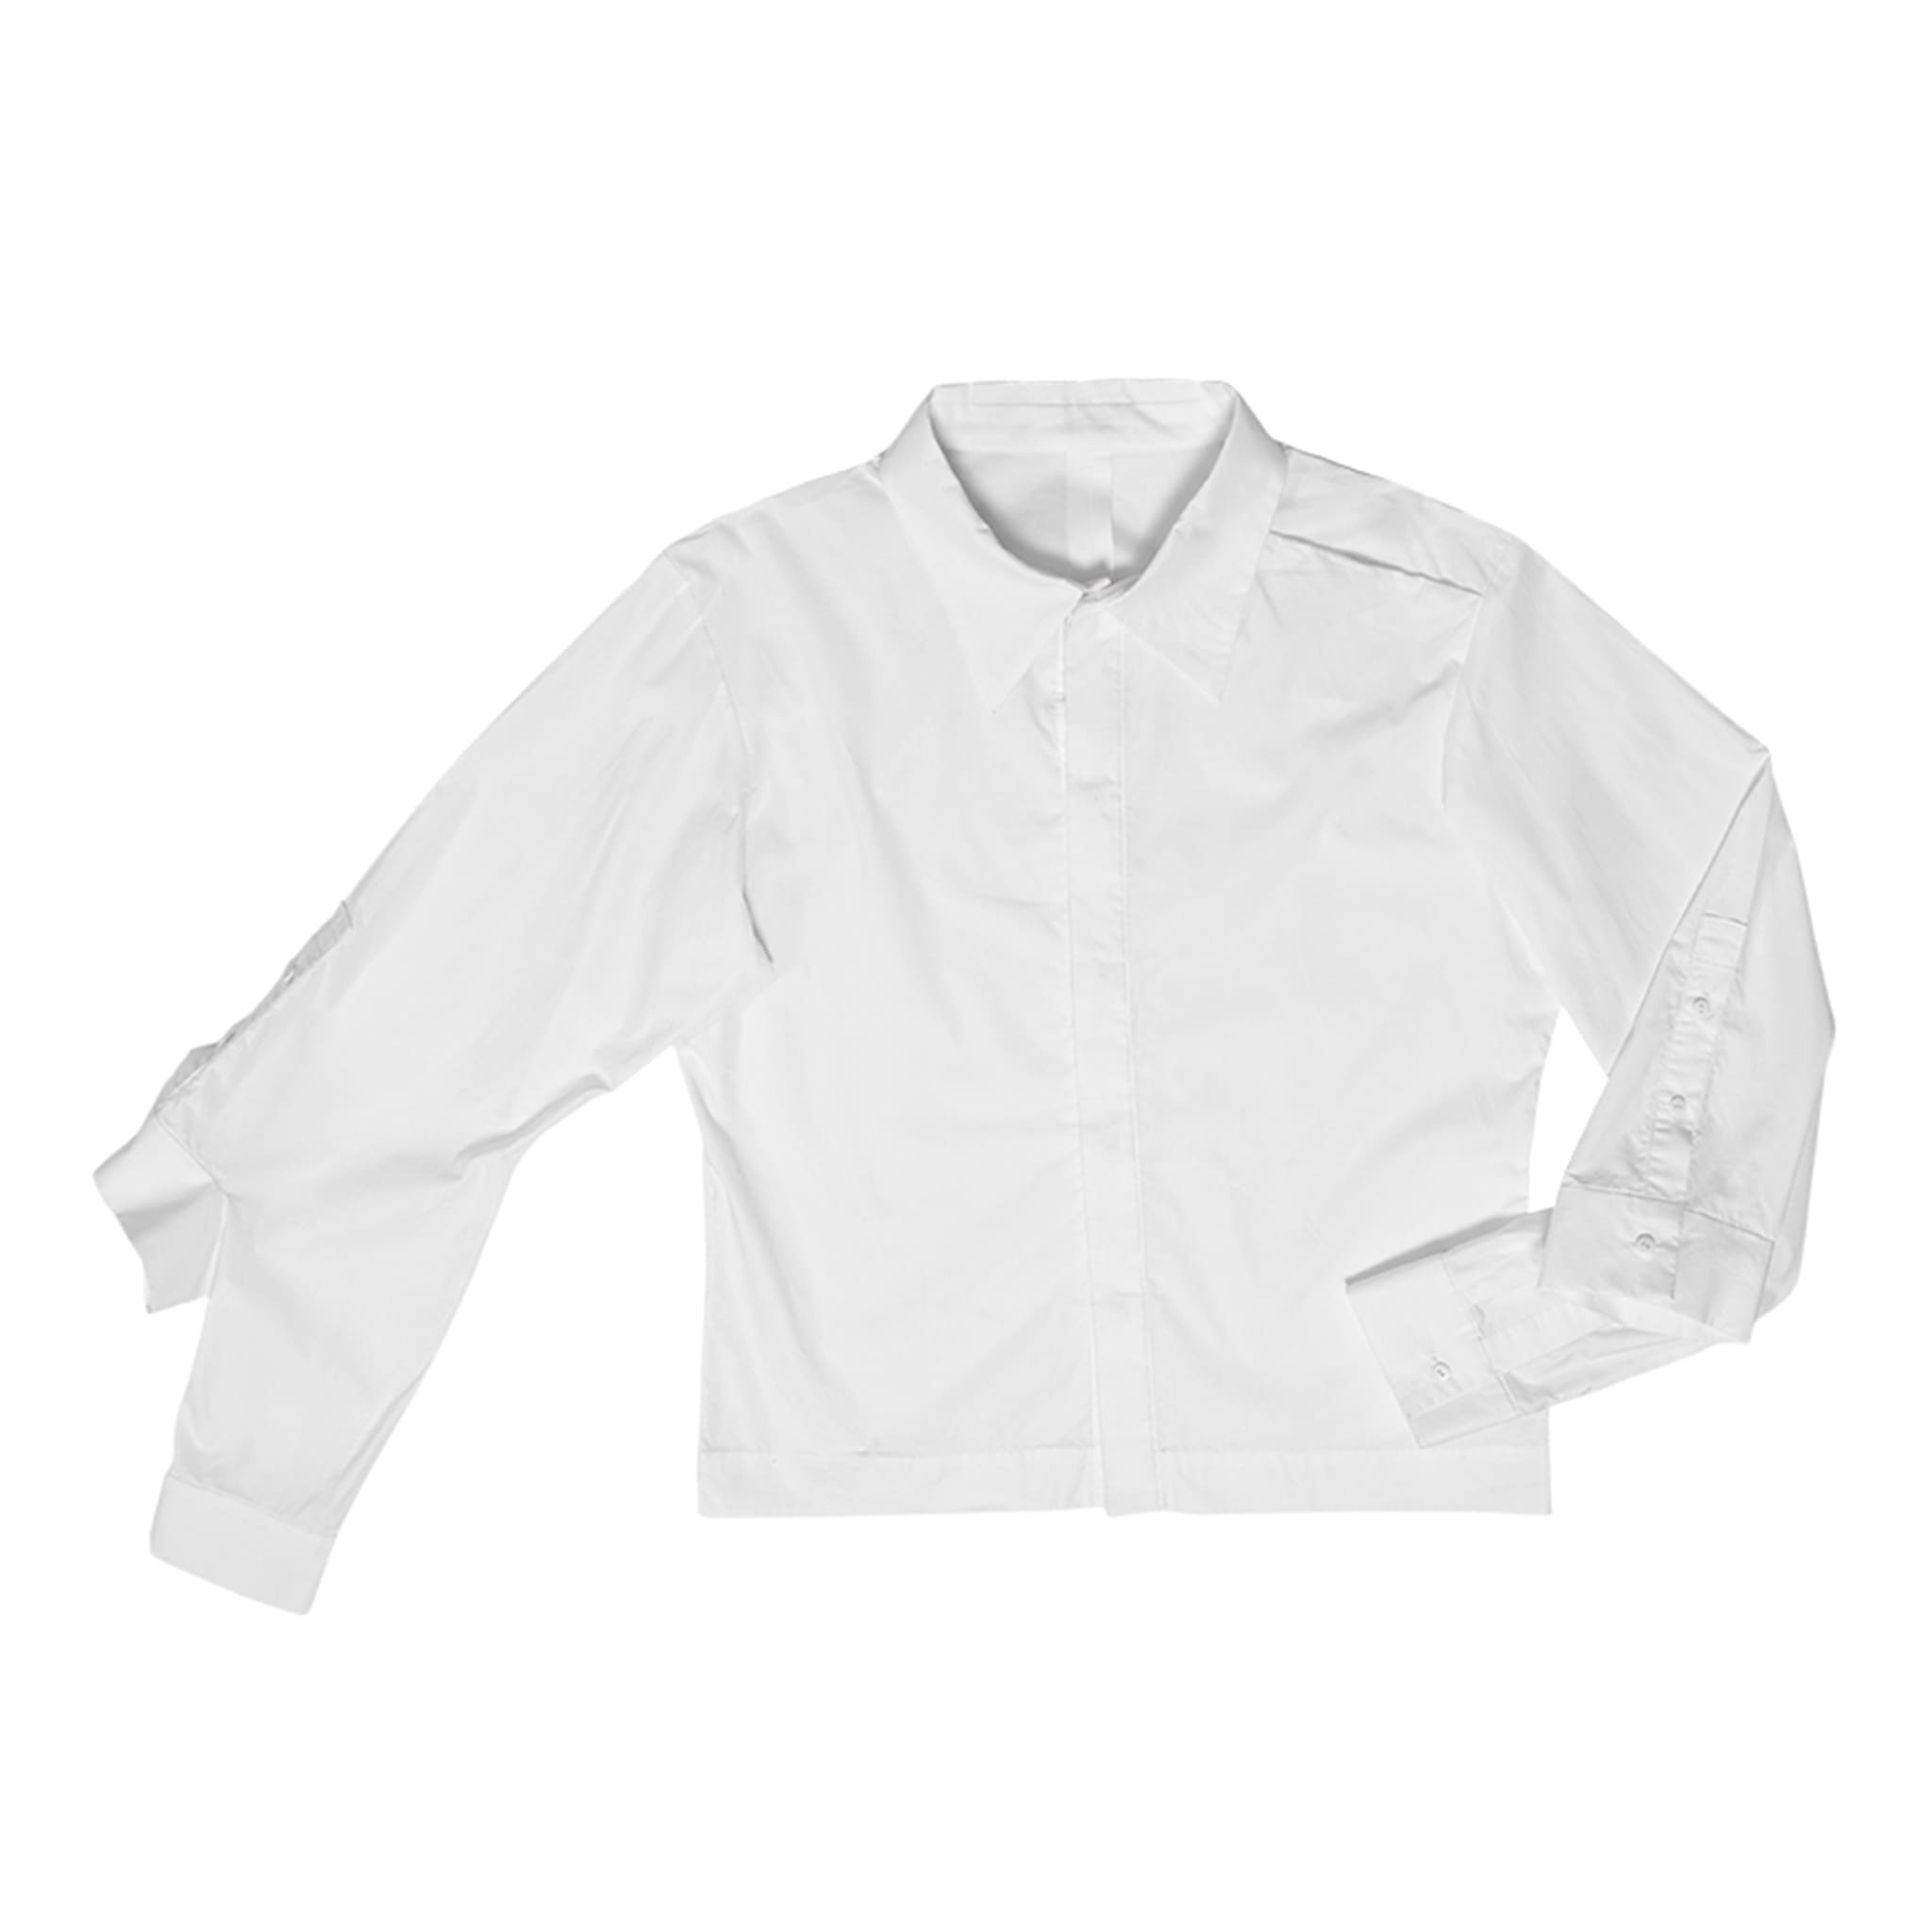 Double Sleeves Deconstructed Short Shirt